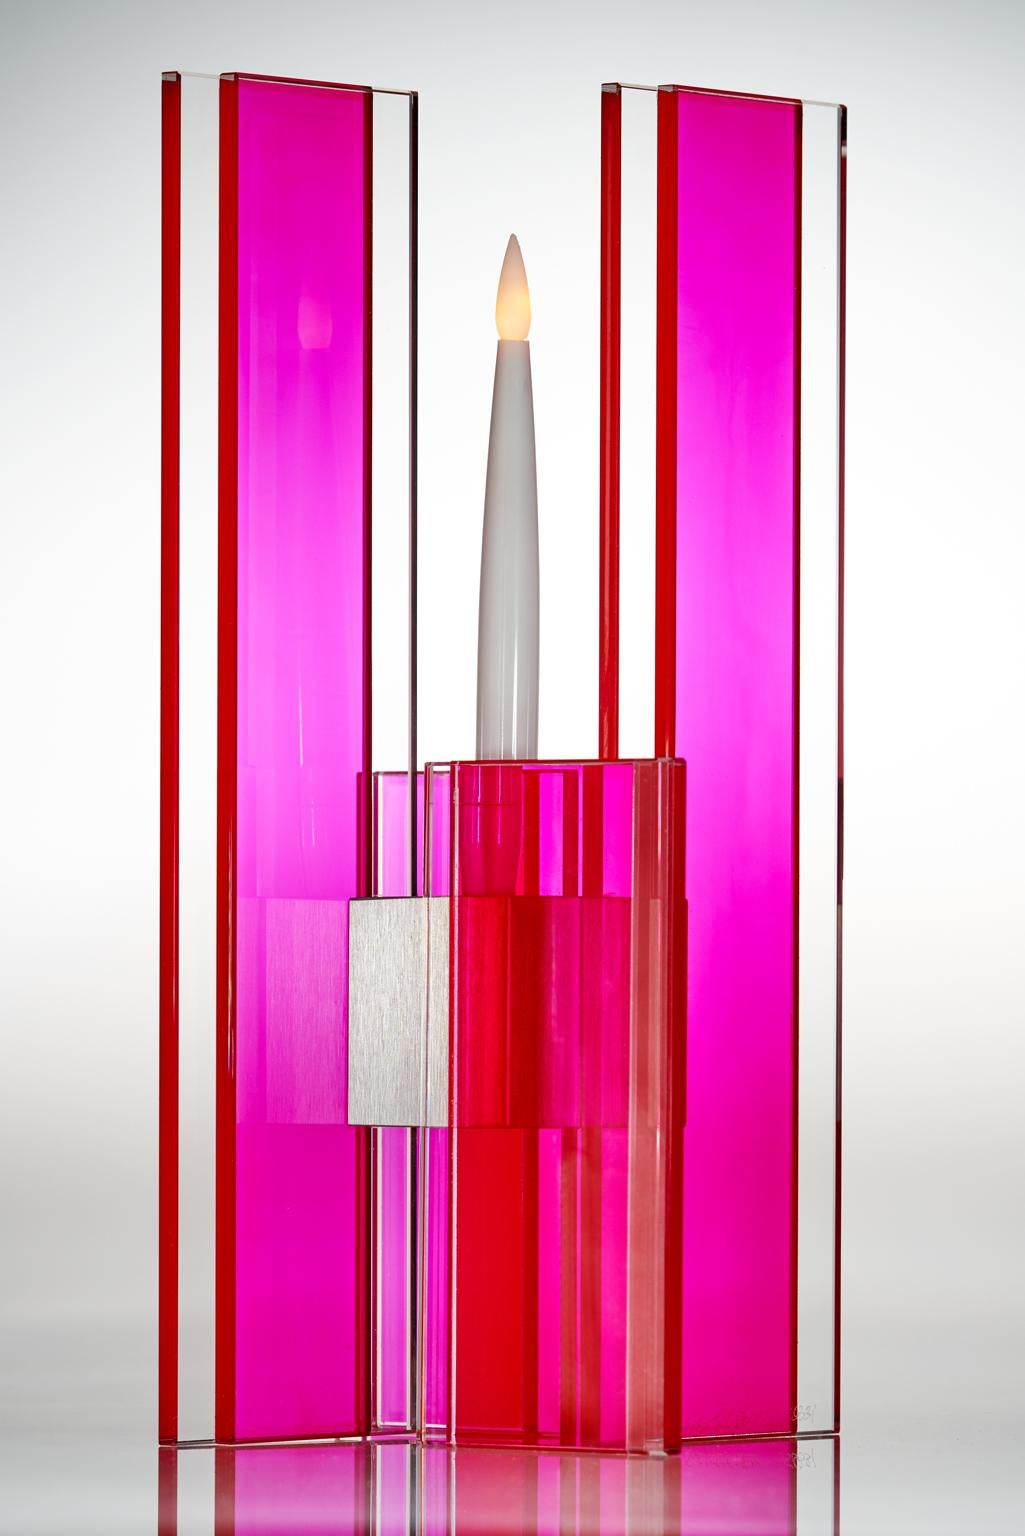 This polished glass candleholder from the Deco series is designed by world renowned glass artist, Sidney Hutter. With 40 years of experience in the contemporary glass and Fine art world, Sidney now creates illuminated designs for the home. Create a